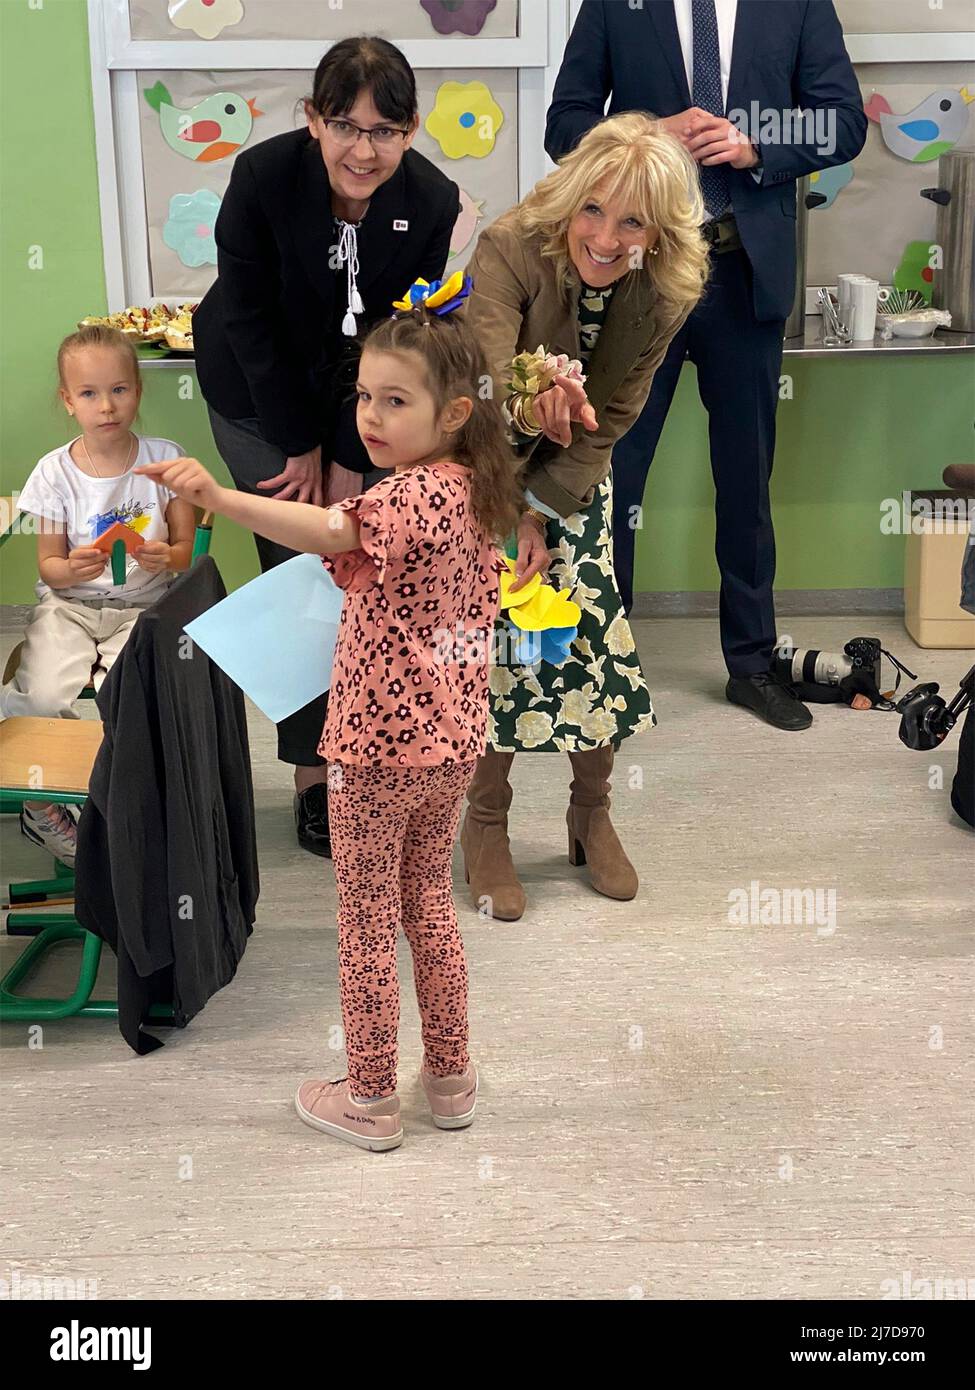 Kosice, Slovakia. 08 May, 2022. U.S. First Lady Jill Biden, left, visits with Ukrainian mothers and their children during a Mother’s Day visit to a refugee center, May 8, 2022 in Kosice, Slovakia.  Credit: U.S. Embassy Slovakia/State Department/Alamy Live News Stock Photo